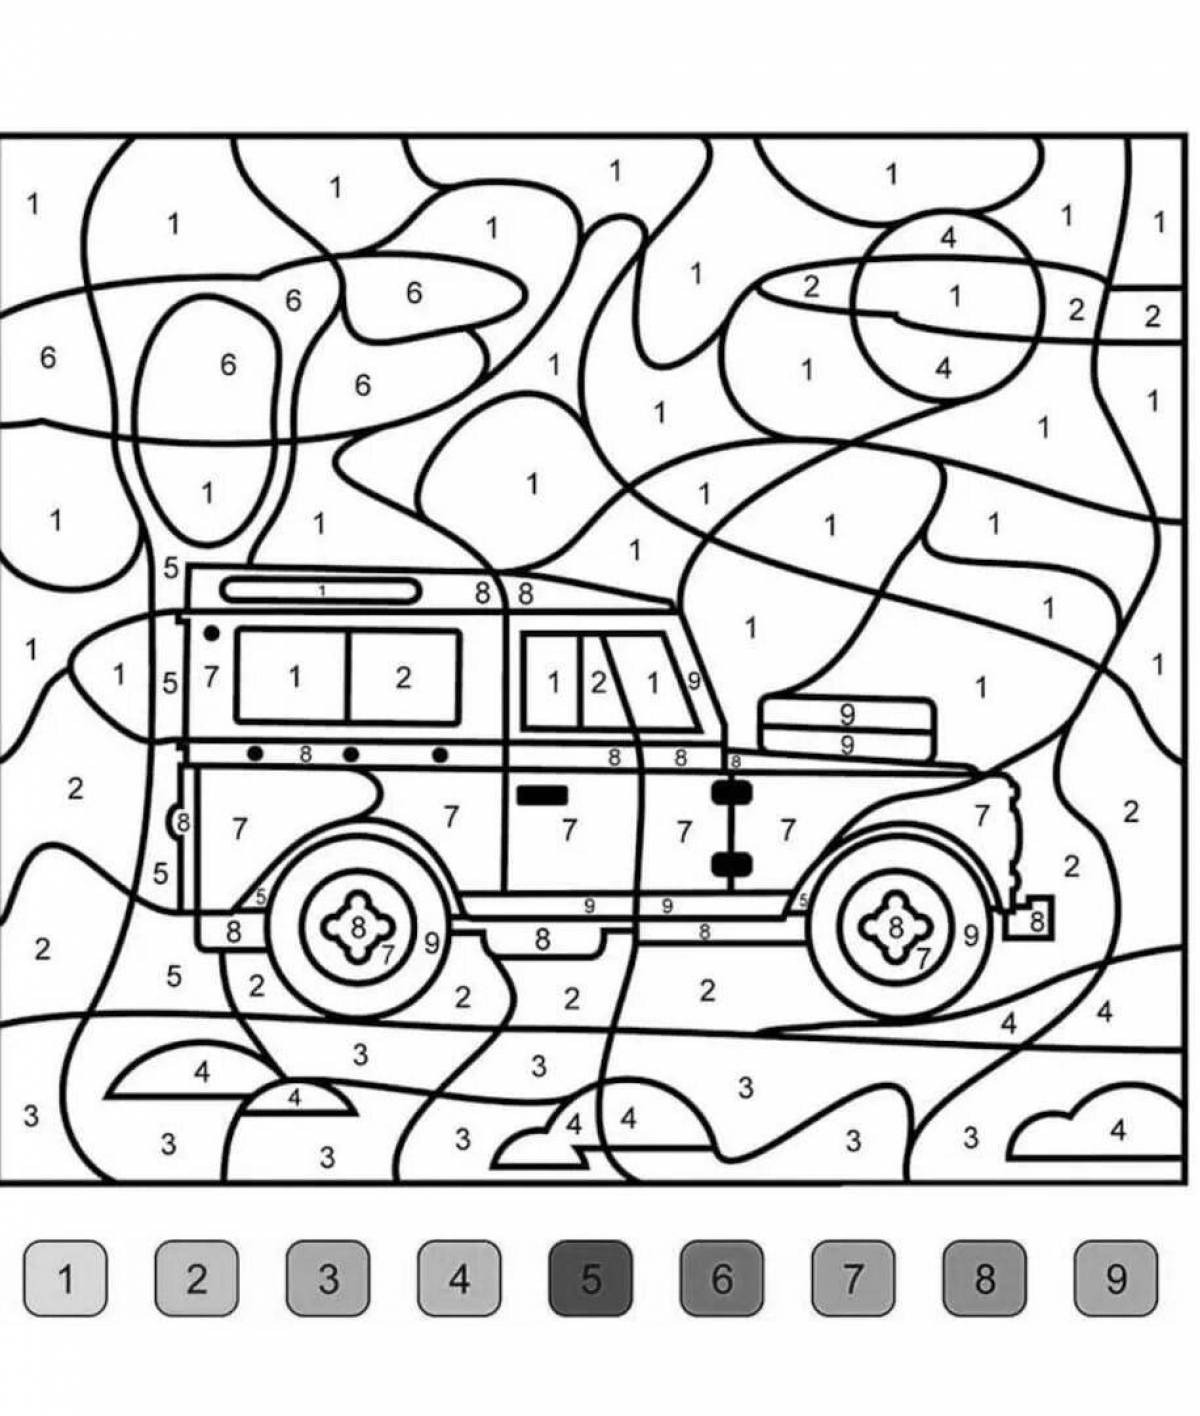 Coloring game for boys 4-5 years old